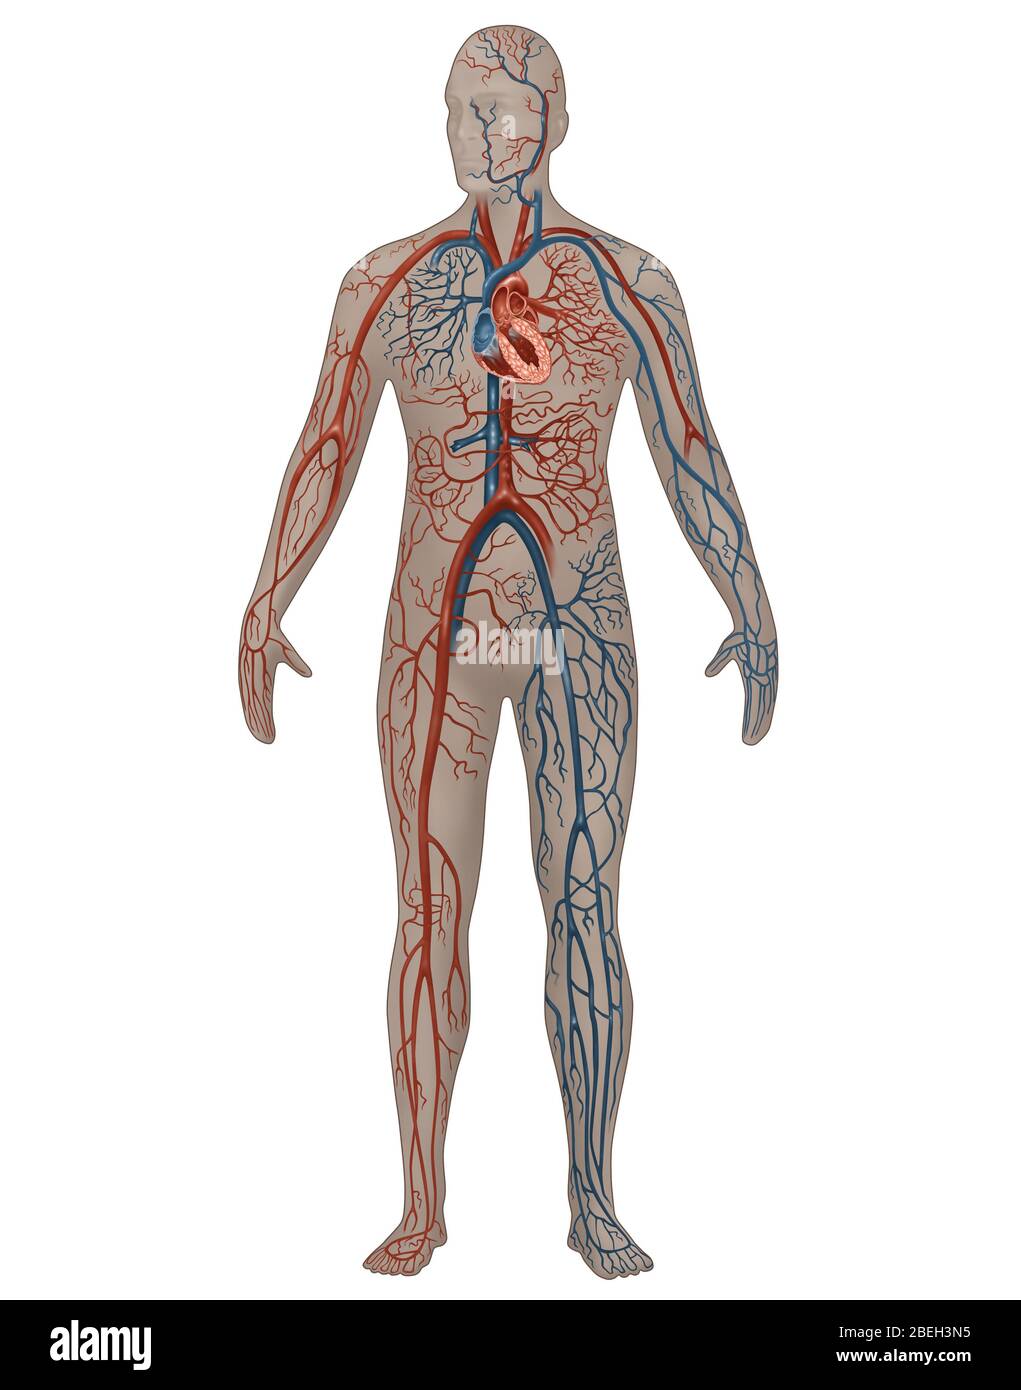 Circulatory System in Male Anatomy Stock Photo